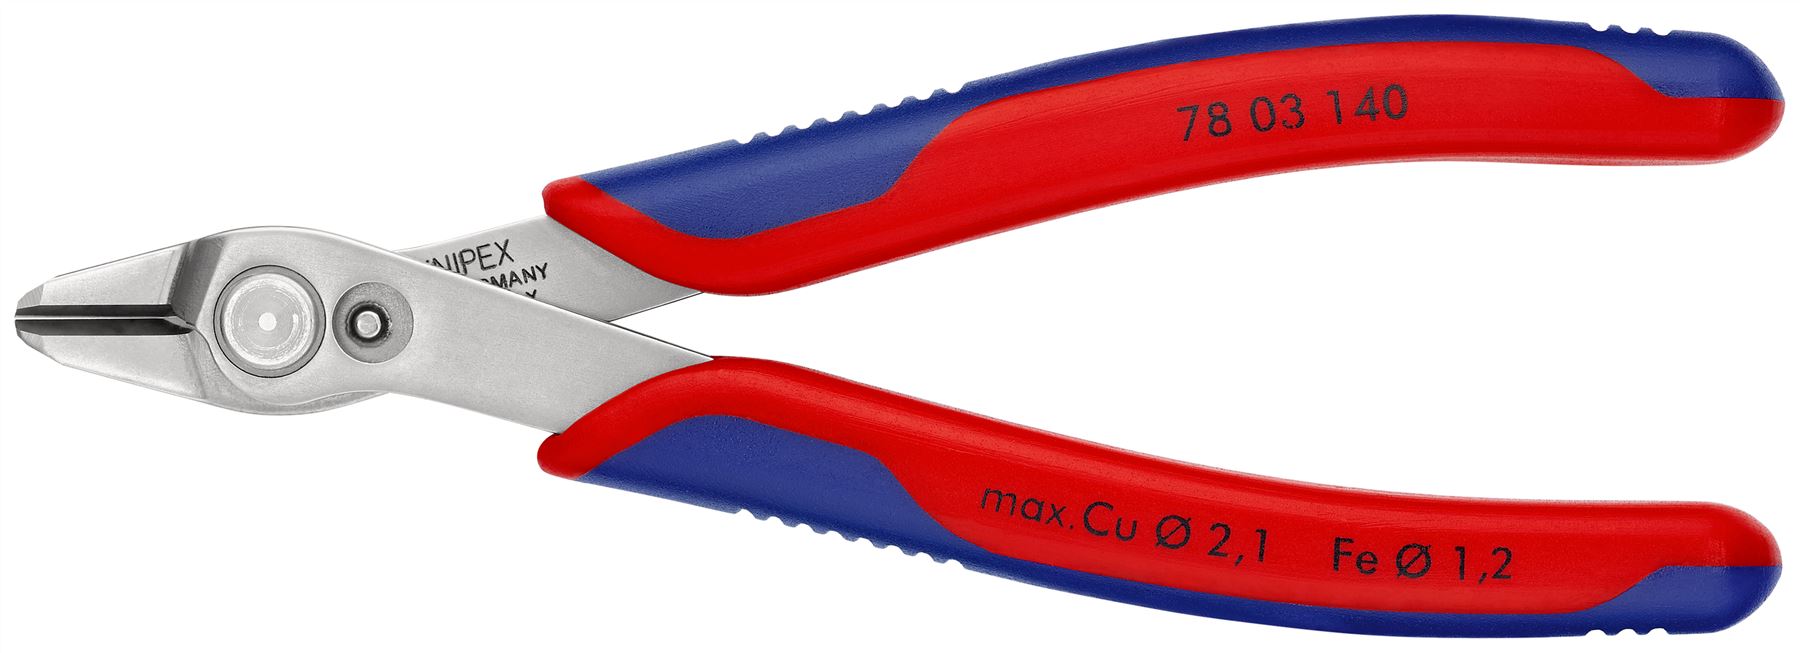 KNIPEX Electronics Super Knips XL Precision Cutting Pliers 140mm Multi Component Grips 78 03 140 SB